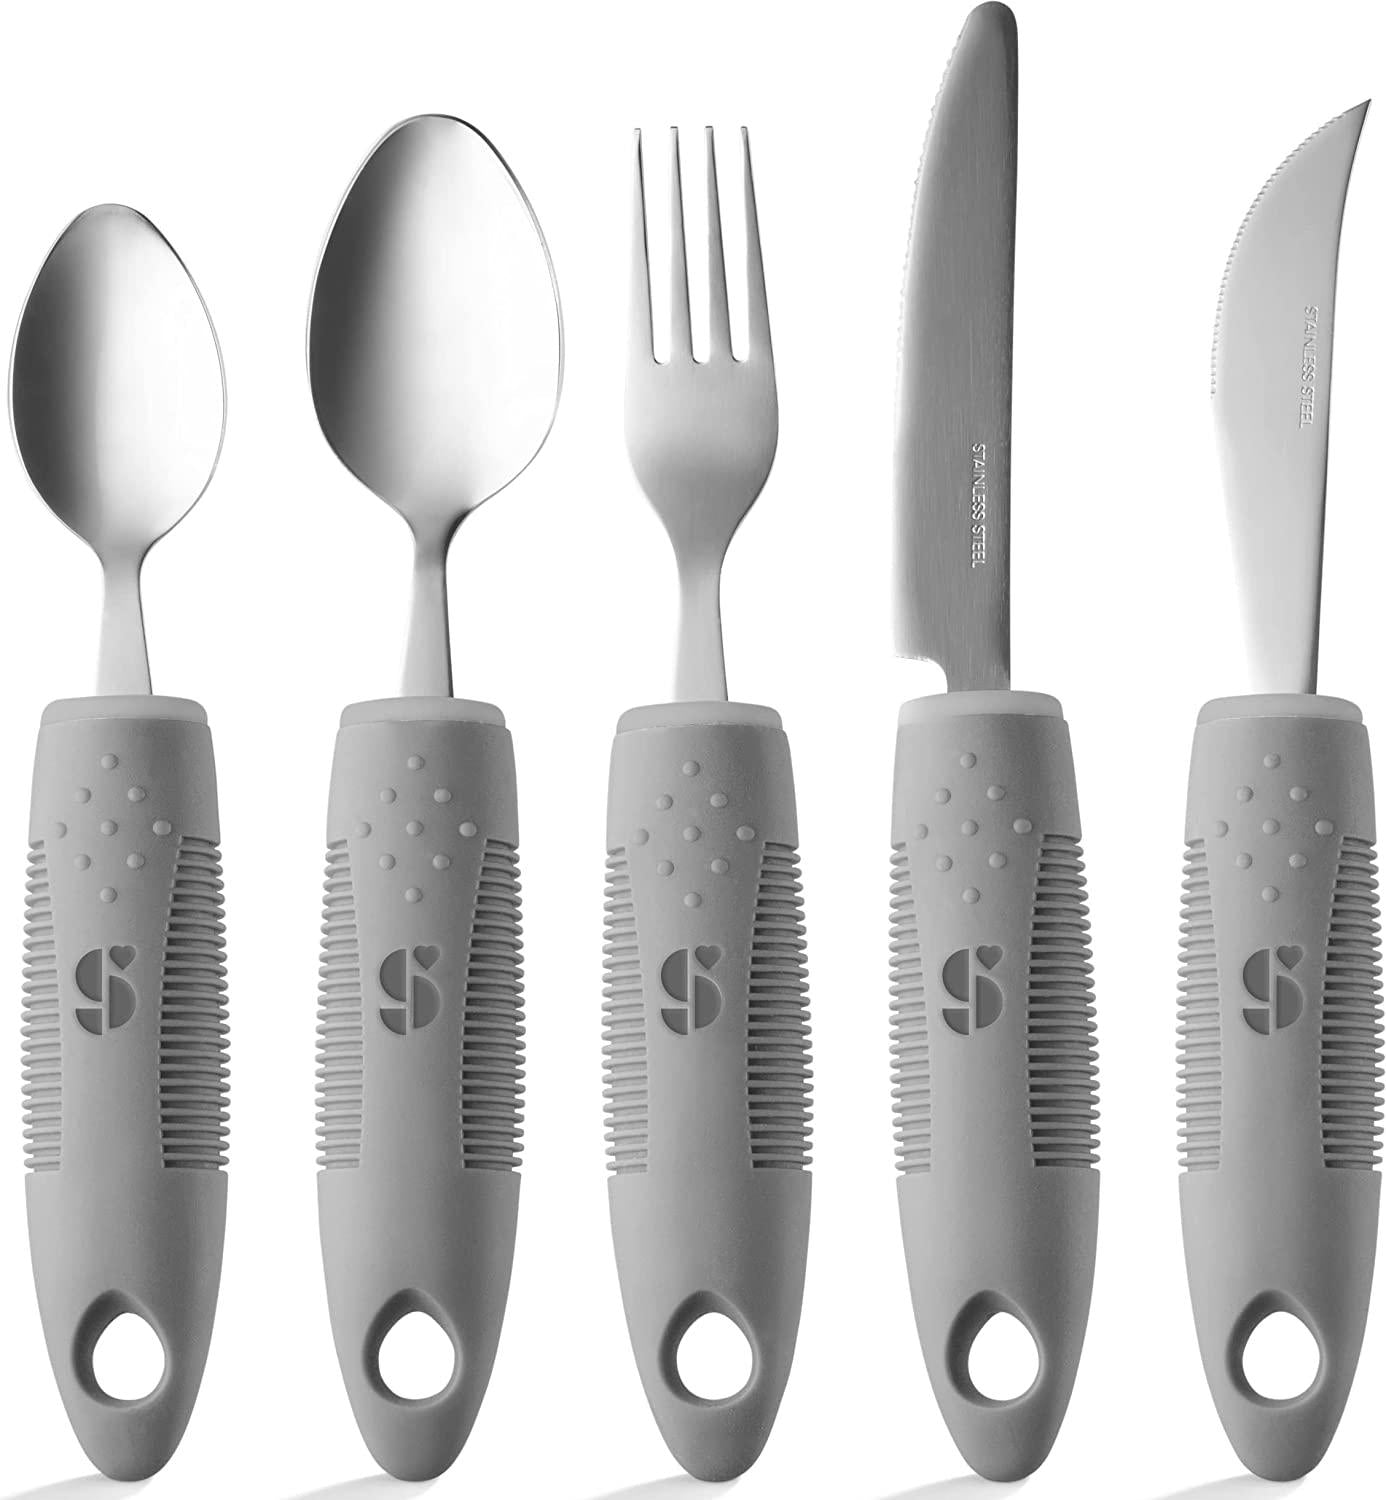 Special Supplies, (Grey) - Adaptive Utensils (4-Piece Kitchen Set) Wide, Non-Weighted, Non-Slip Handles for Hand Tremors, Arthritis, Parkinson's or Elderly use Stainless Steel Knife, Fork, Spoons - Grey